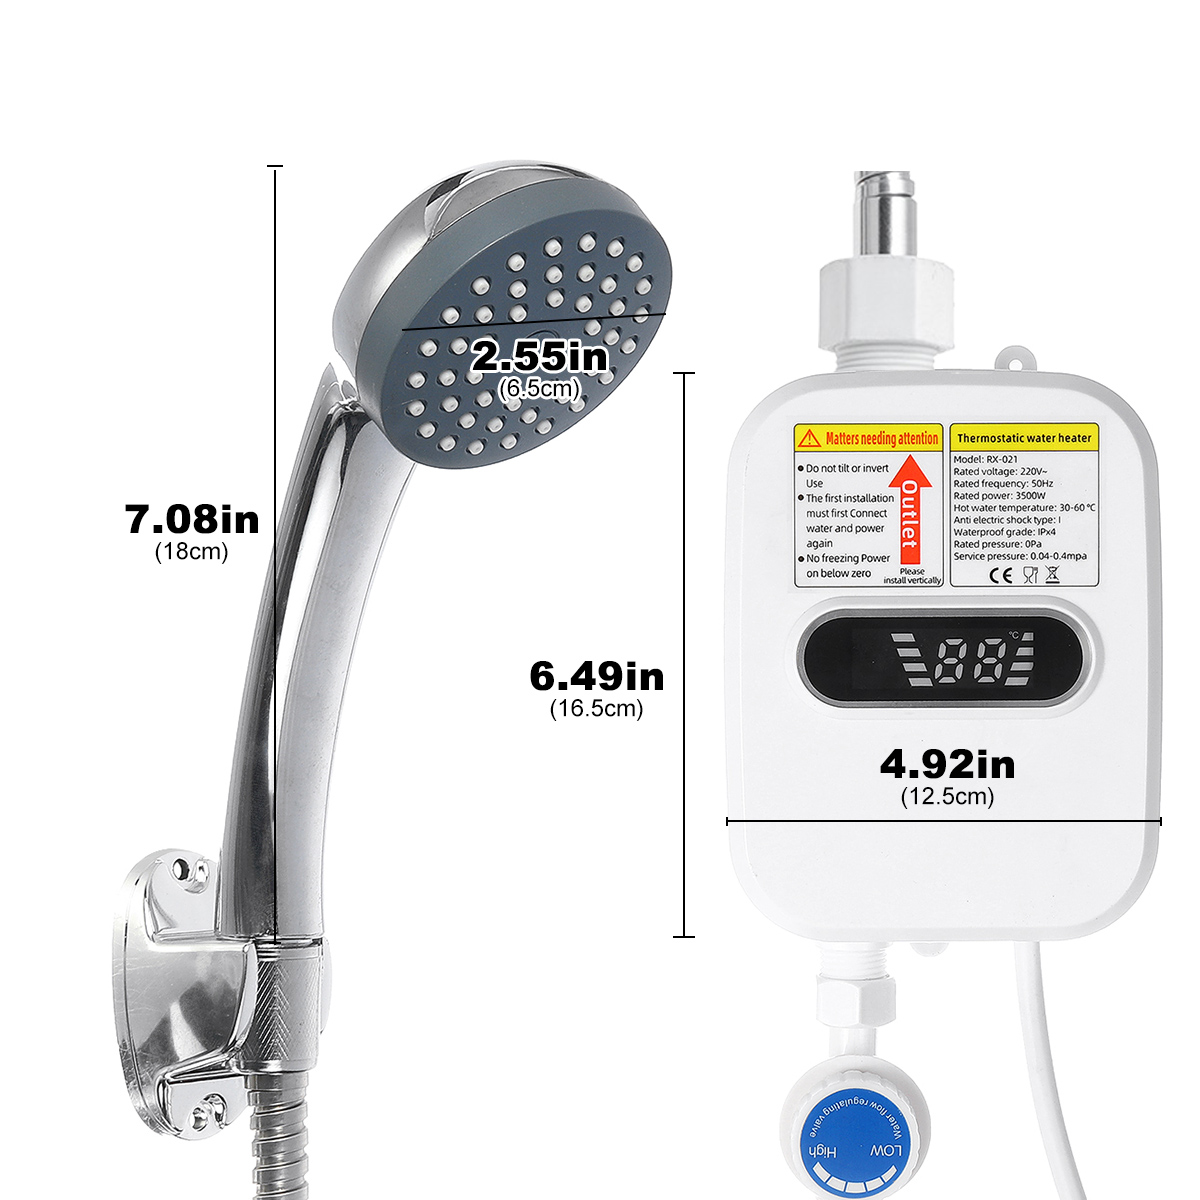 3500W Electric Tankless Water Heater Shower Head Set, Instant Hot Water Heater LCD Display,Overheating Protection, White - image 5 of 11